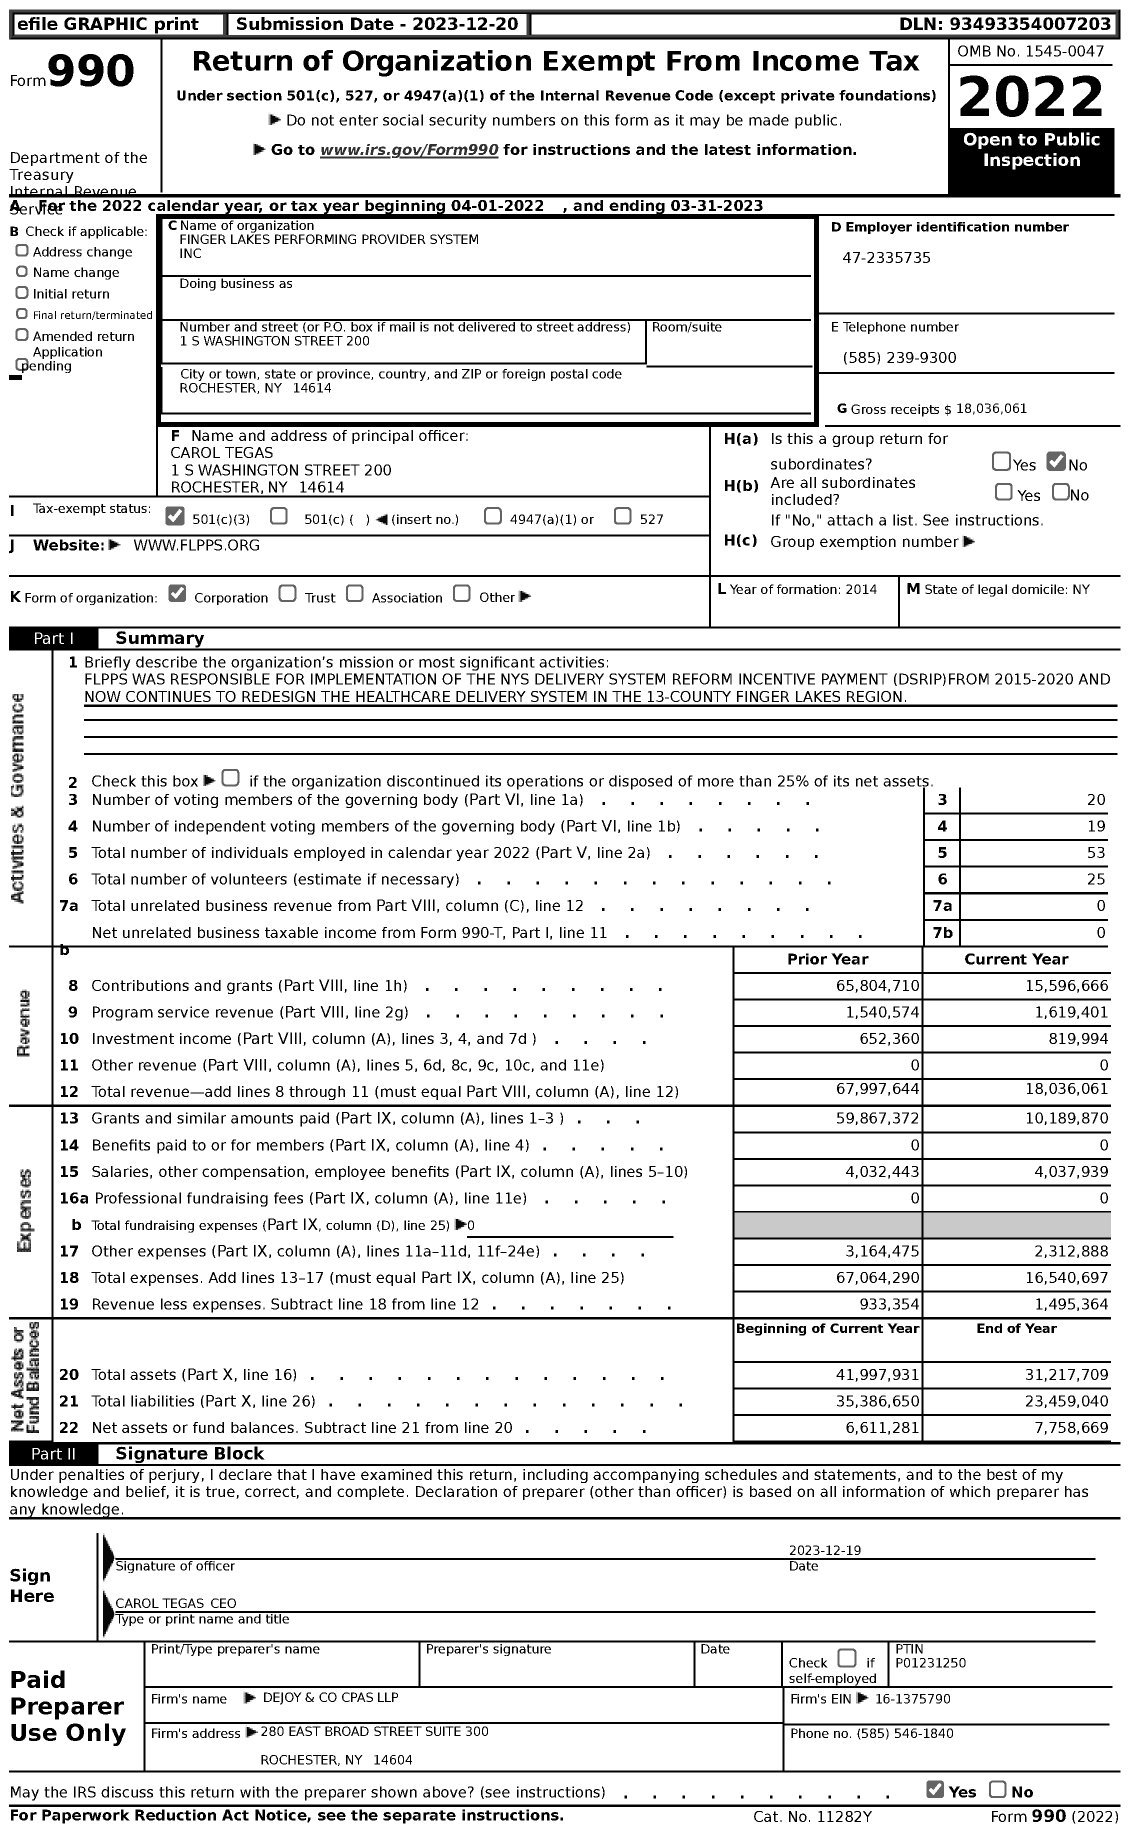 Image of first page of 2022 Form 990 for Finger Lakes Performing Provider System (FLPPS)